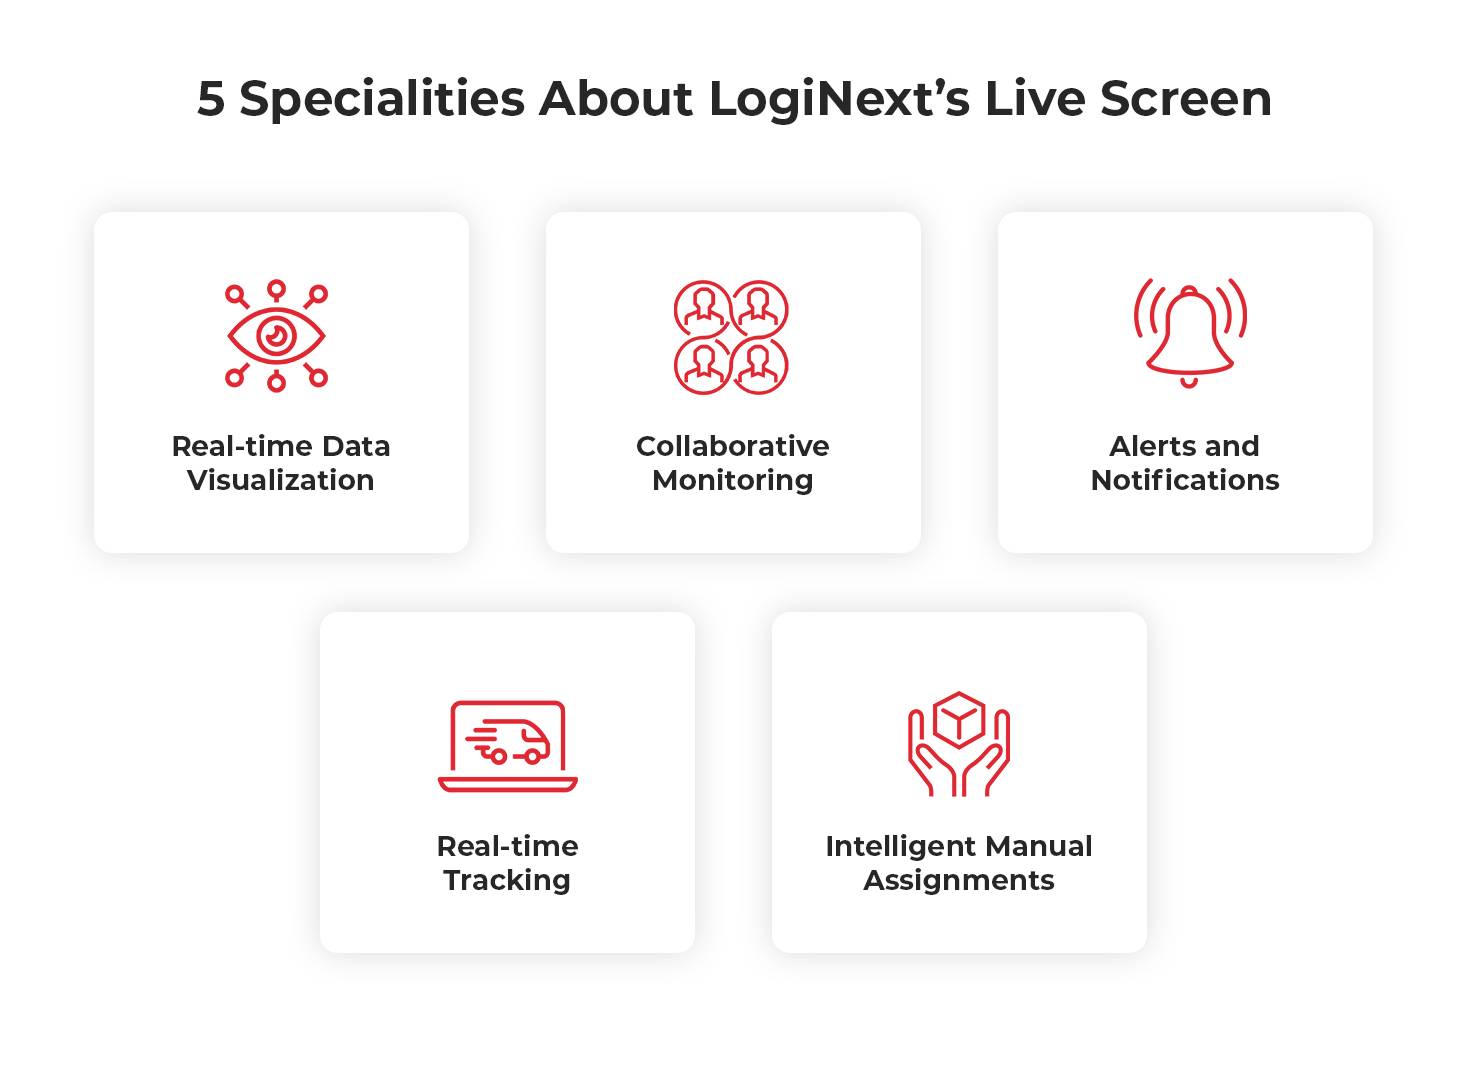 5 Specialities About LogiNext’s Live Screen